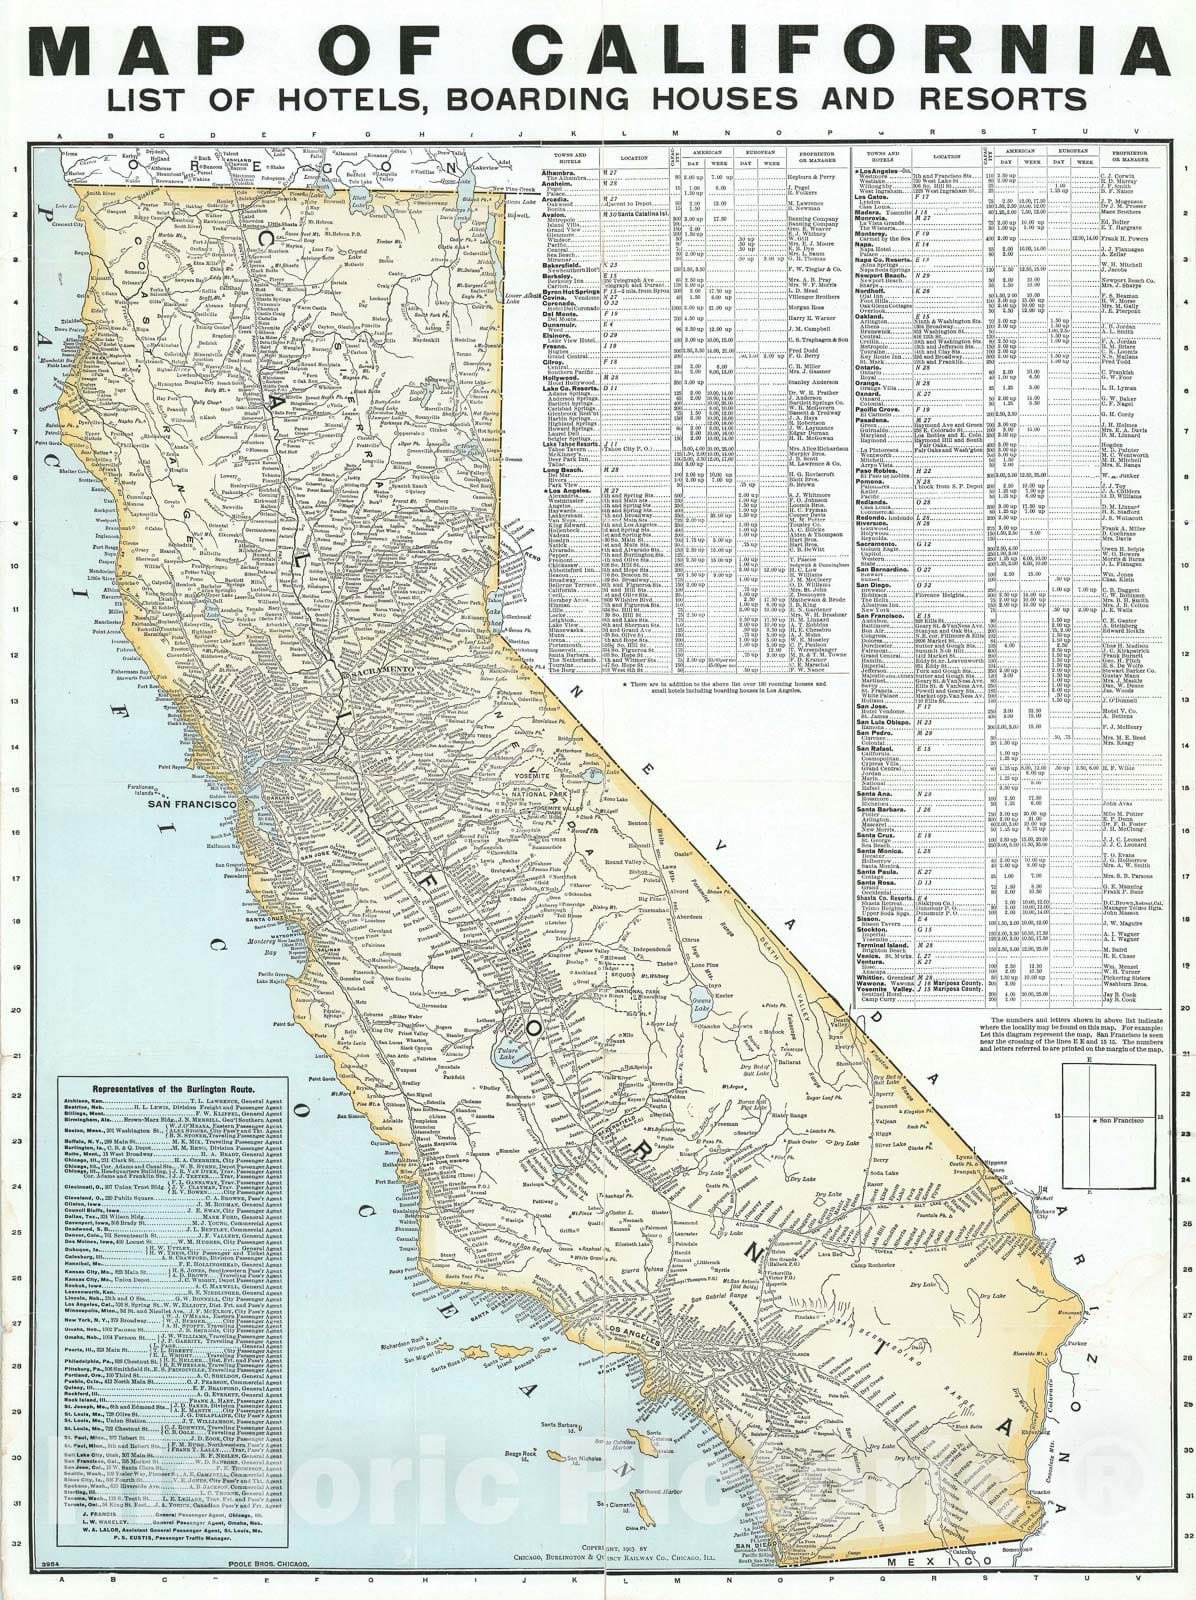 Historic Map : Railroad Map of California w/ a List of Hotels, Poole Brothers, 1903, Vintage Wall Art